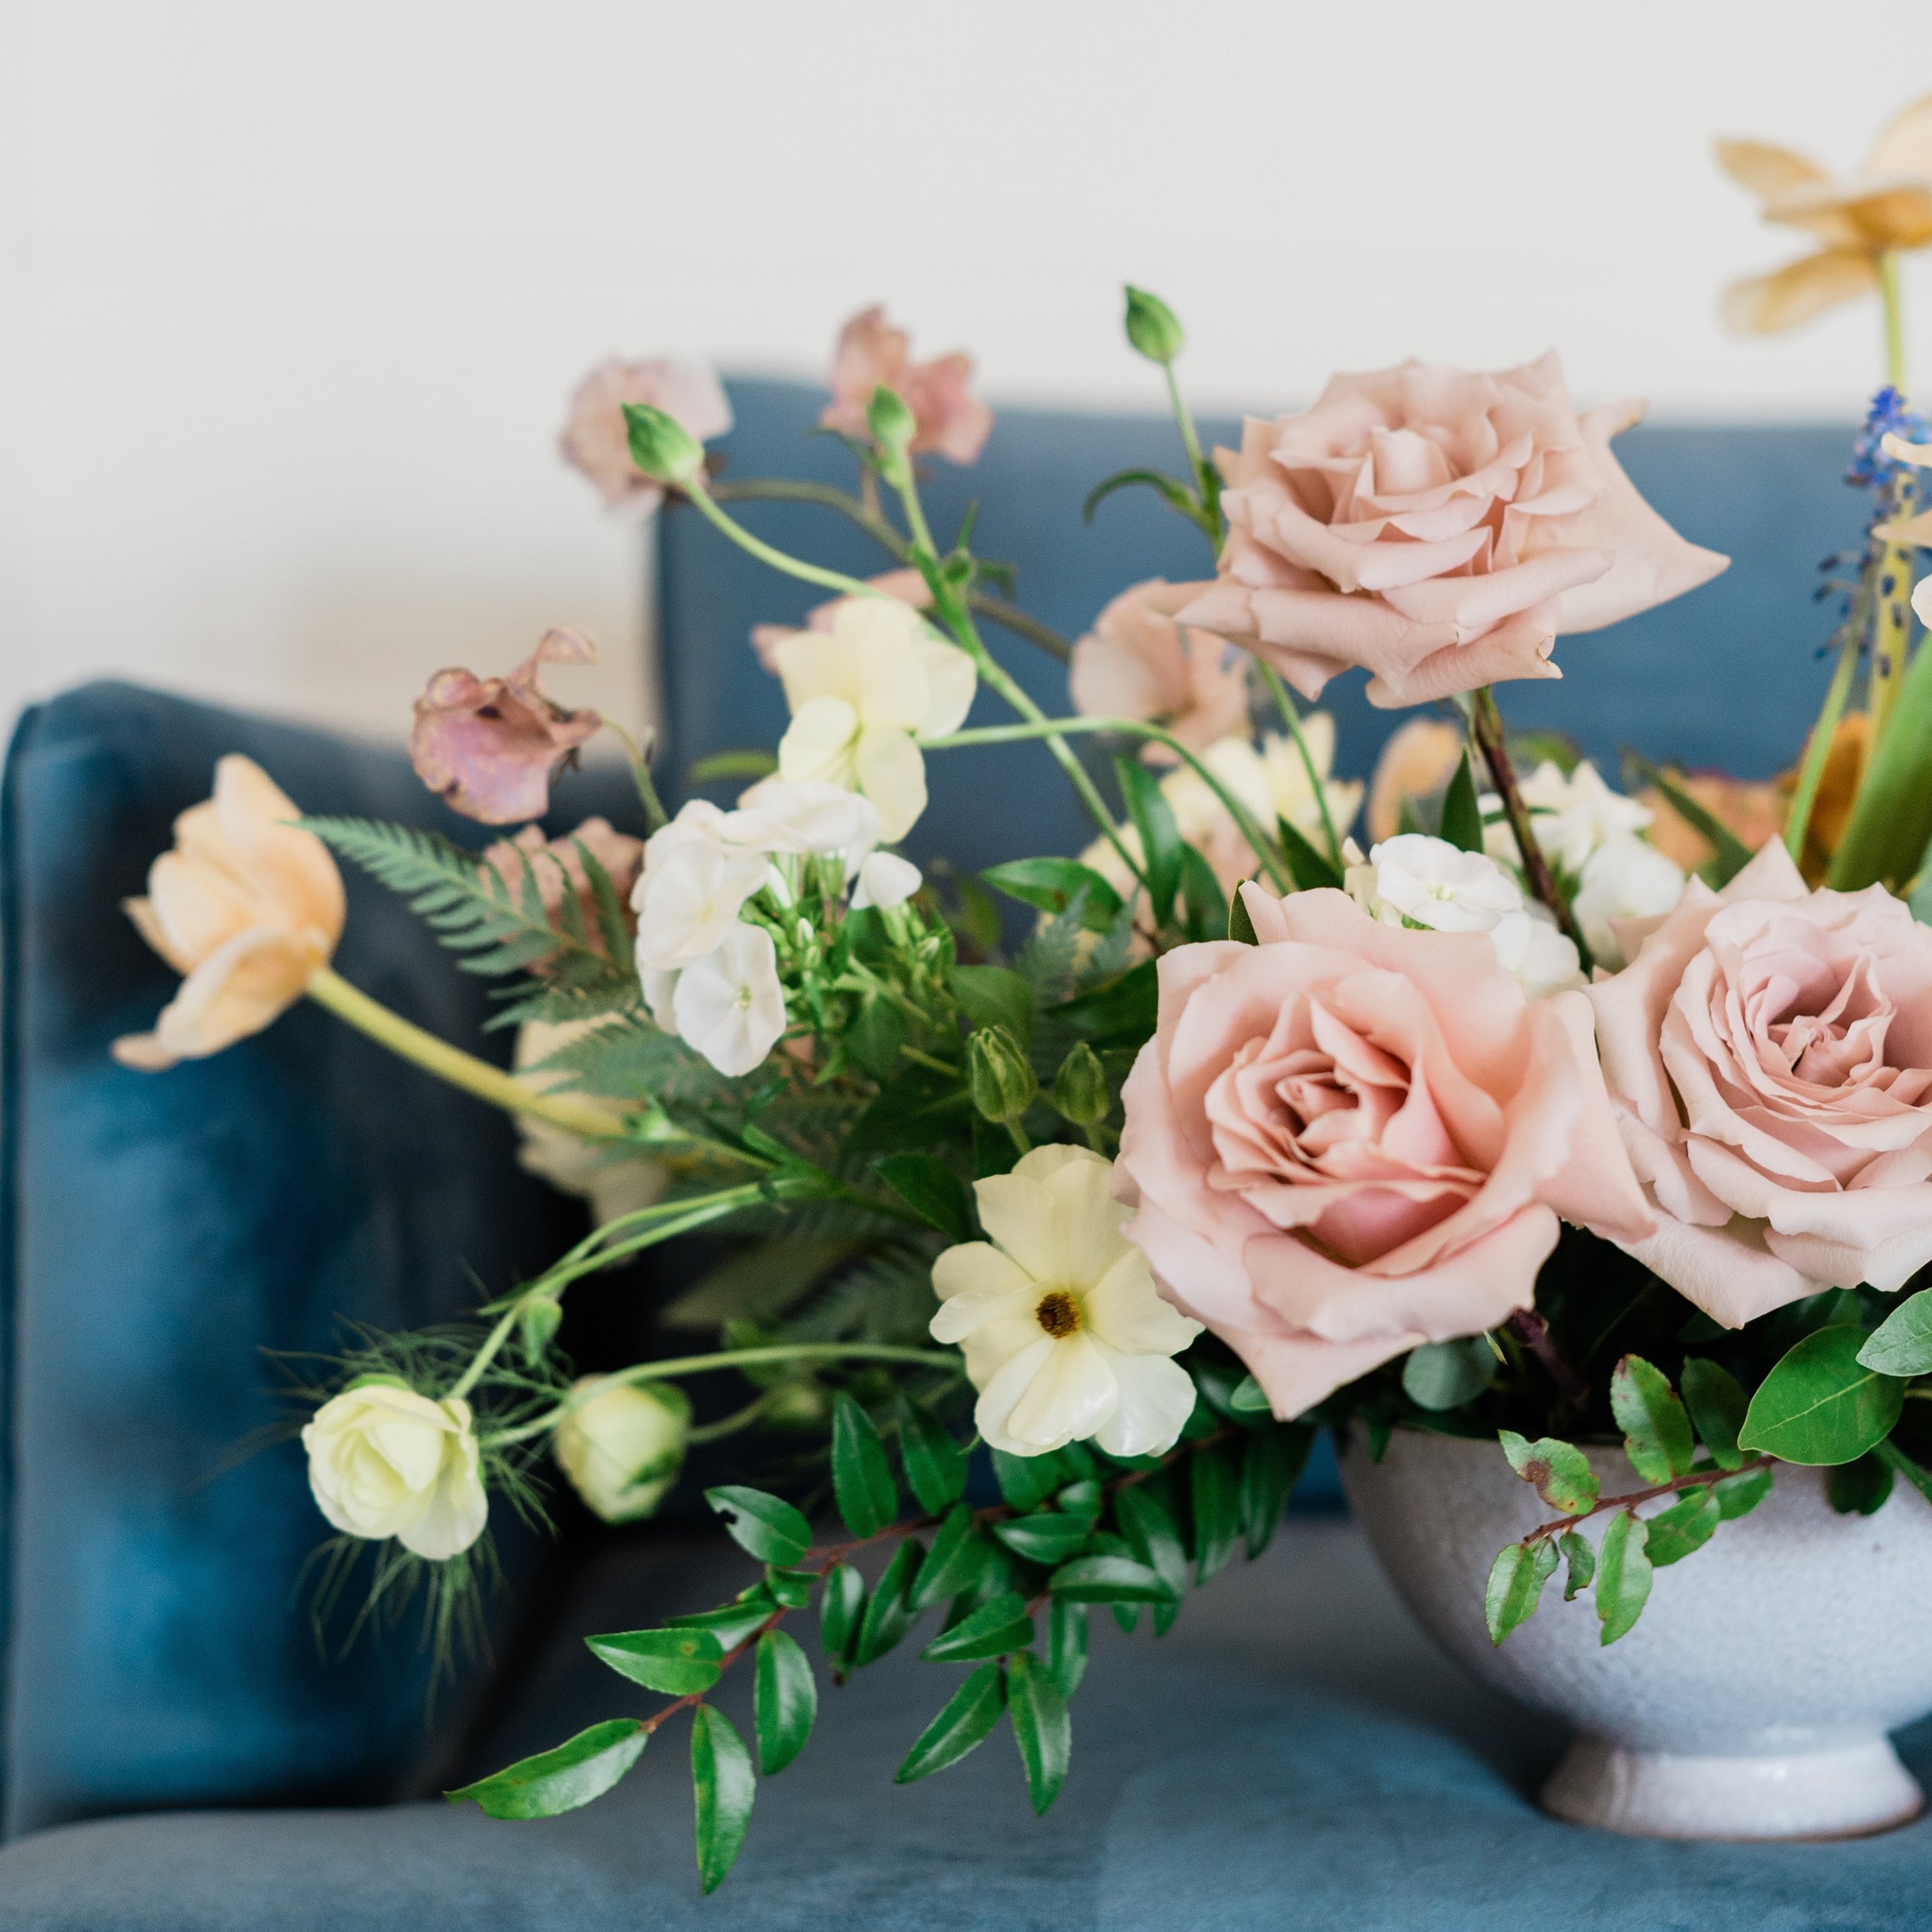 What is a color palette you can&rsquo;t get enough of? For me &mdash; it&rsquo;s this. Peachy goodness anchored with a fabulous blue.

Venue: @crimsonlanevenue 
Floral: @francesfloraldesign 
Furniture: @aspenjeanplanning